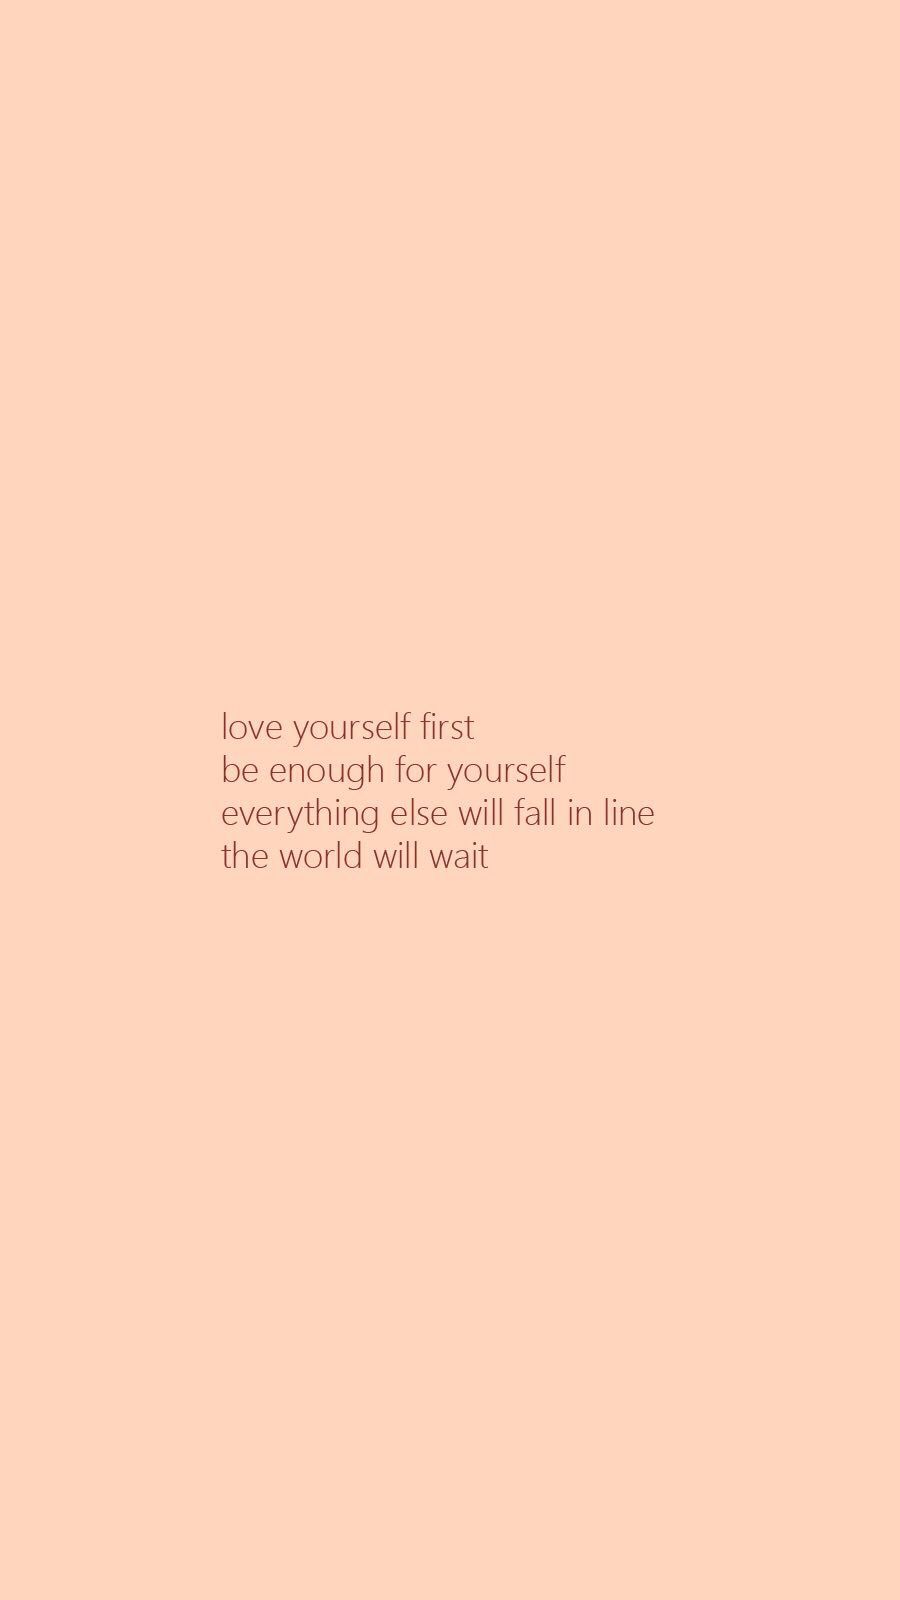 Self love first wallpaper love yourself first quotes quote aesthetic love you more quotes